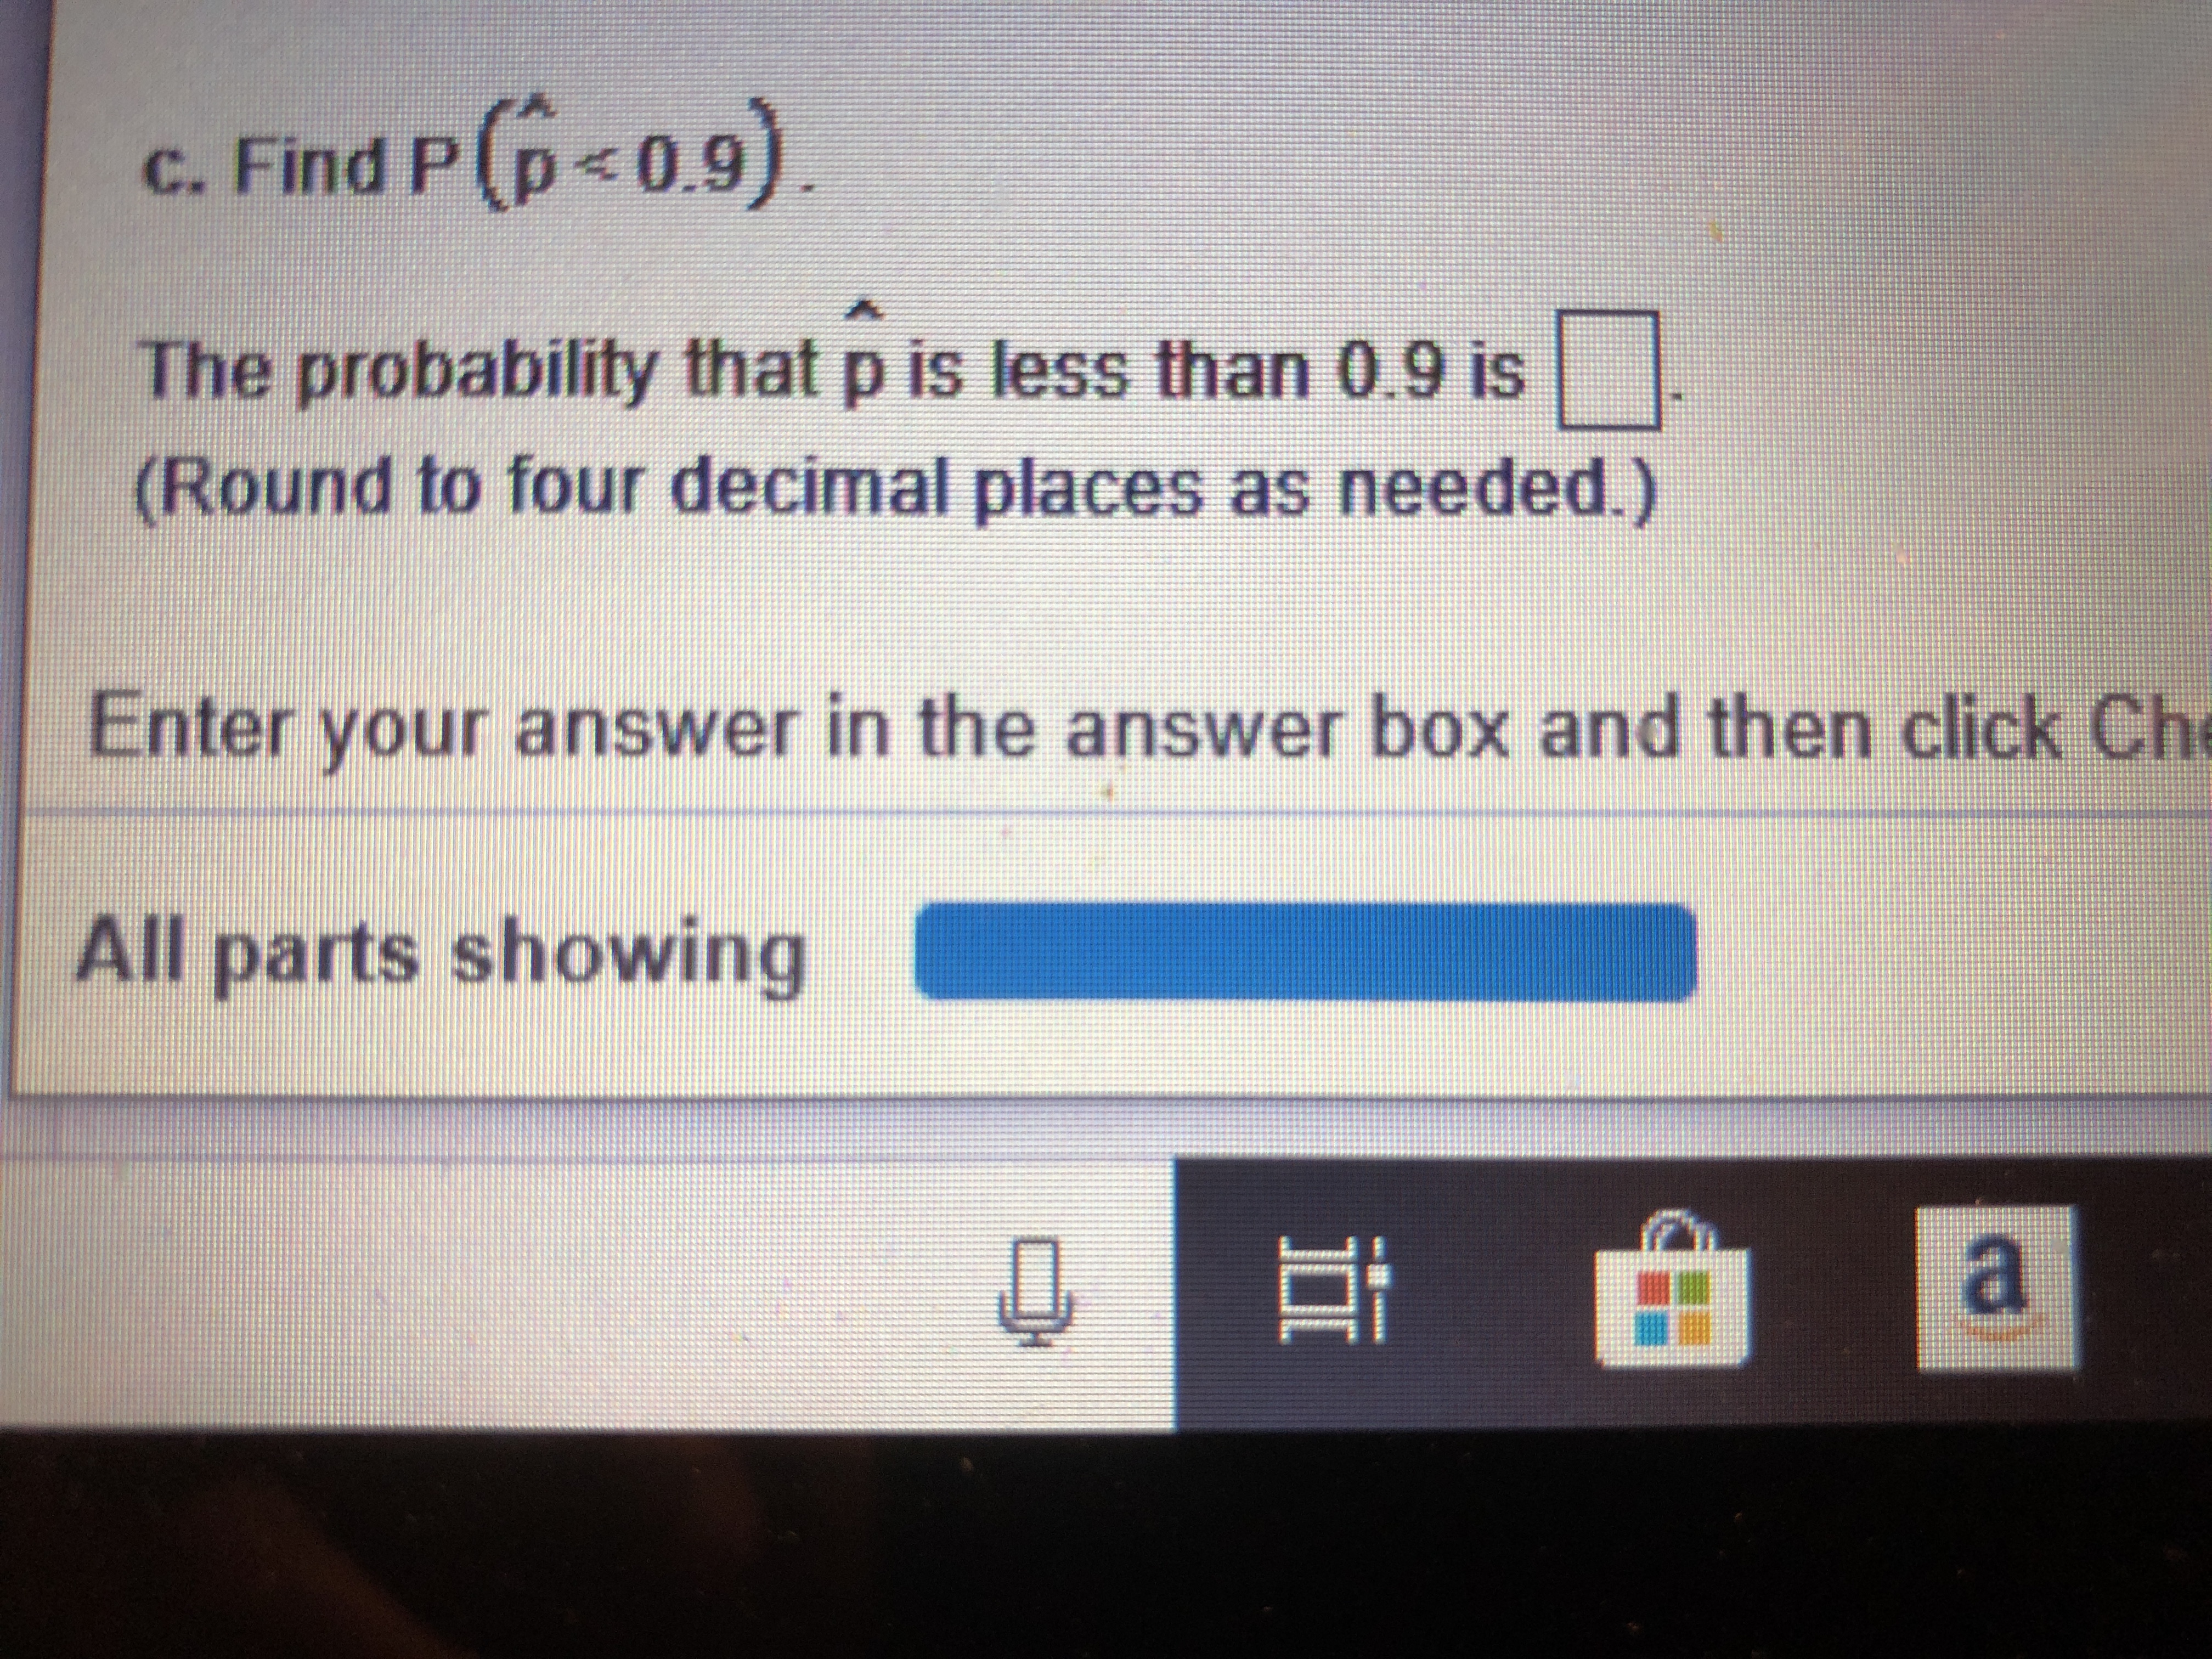 c. Find P(p<0.9
The probability that p is less than 0.9 is
(Round to four decimal places as needed.)
Enter your answer in the answer box and then click Ch
All parts showing
a
